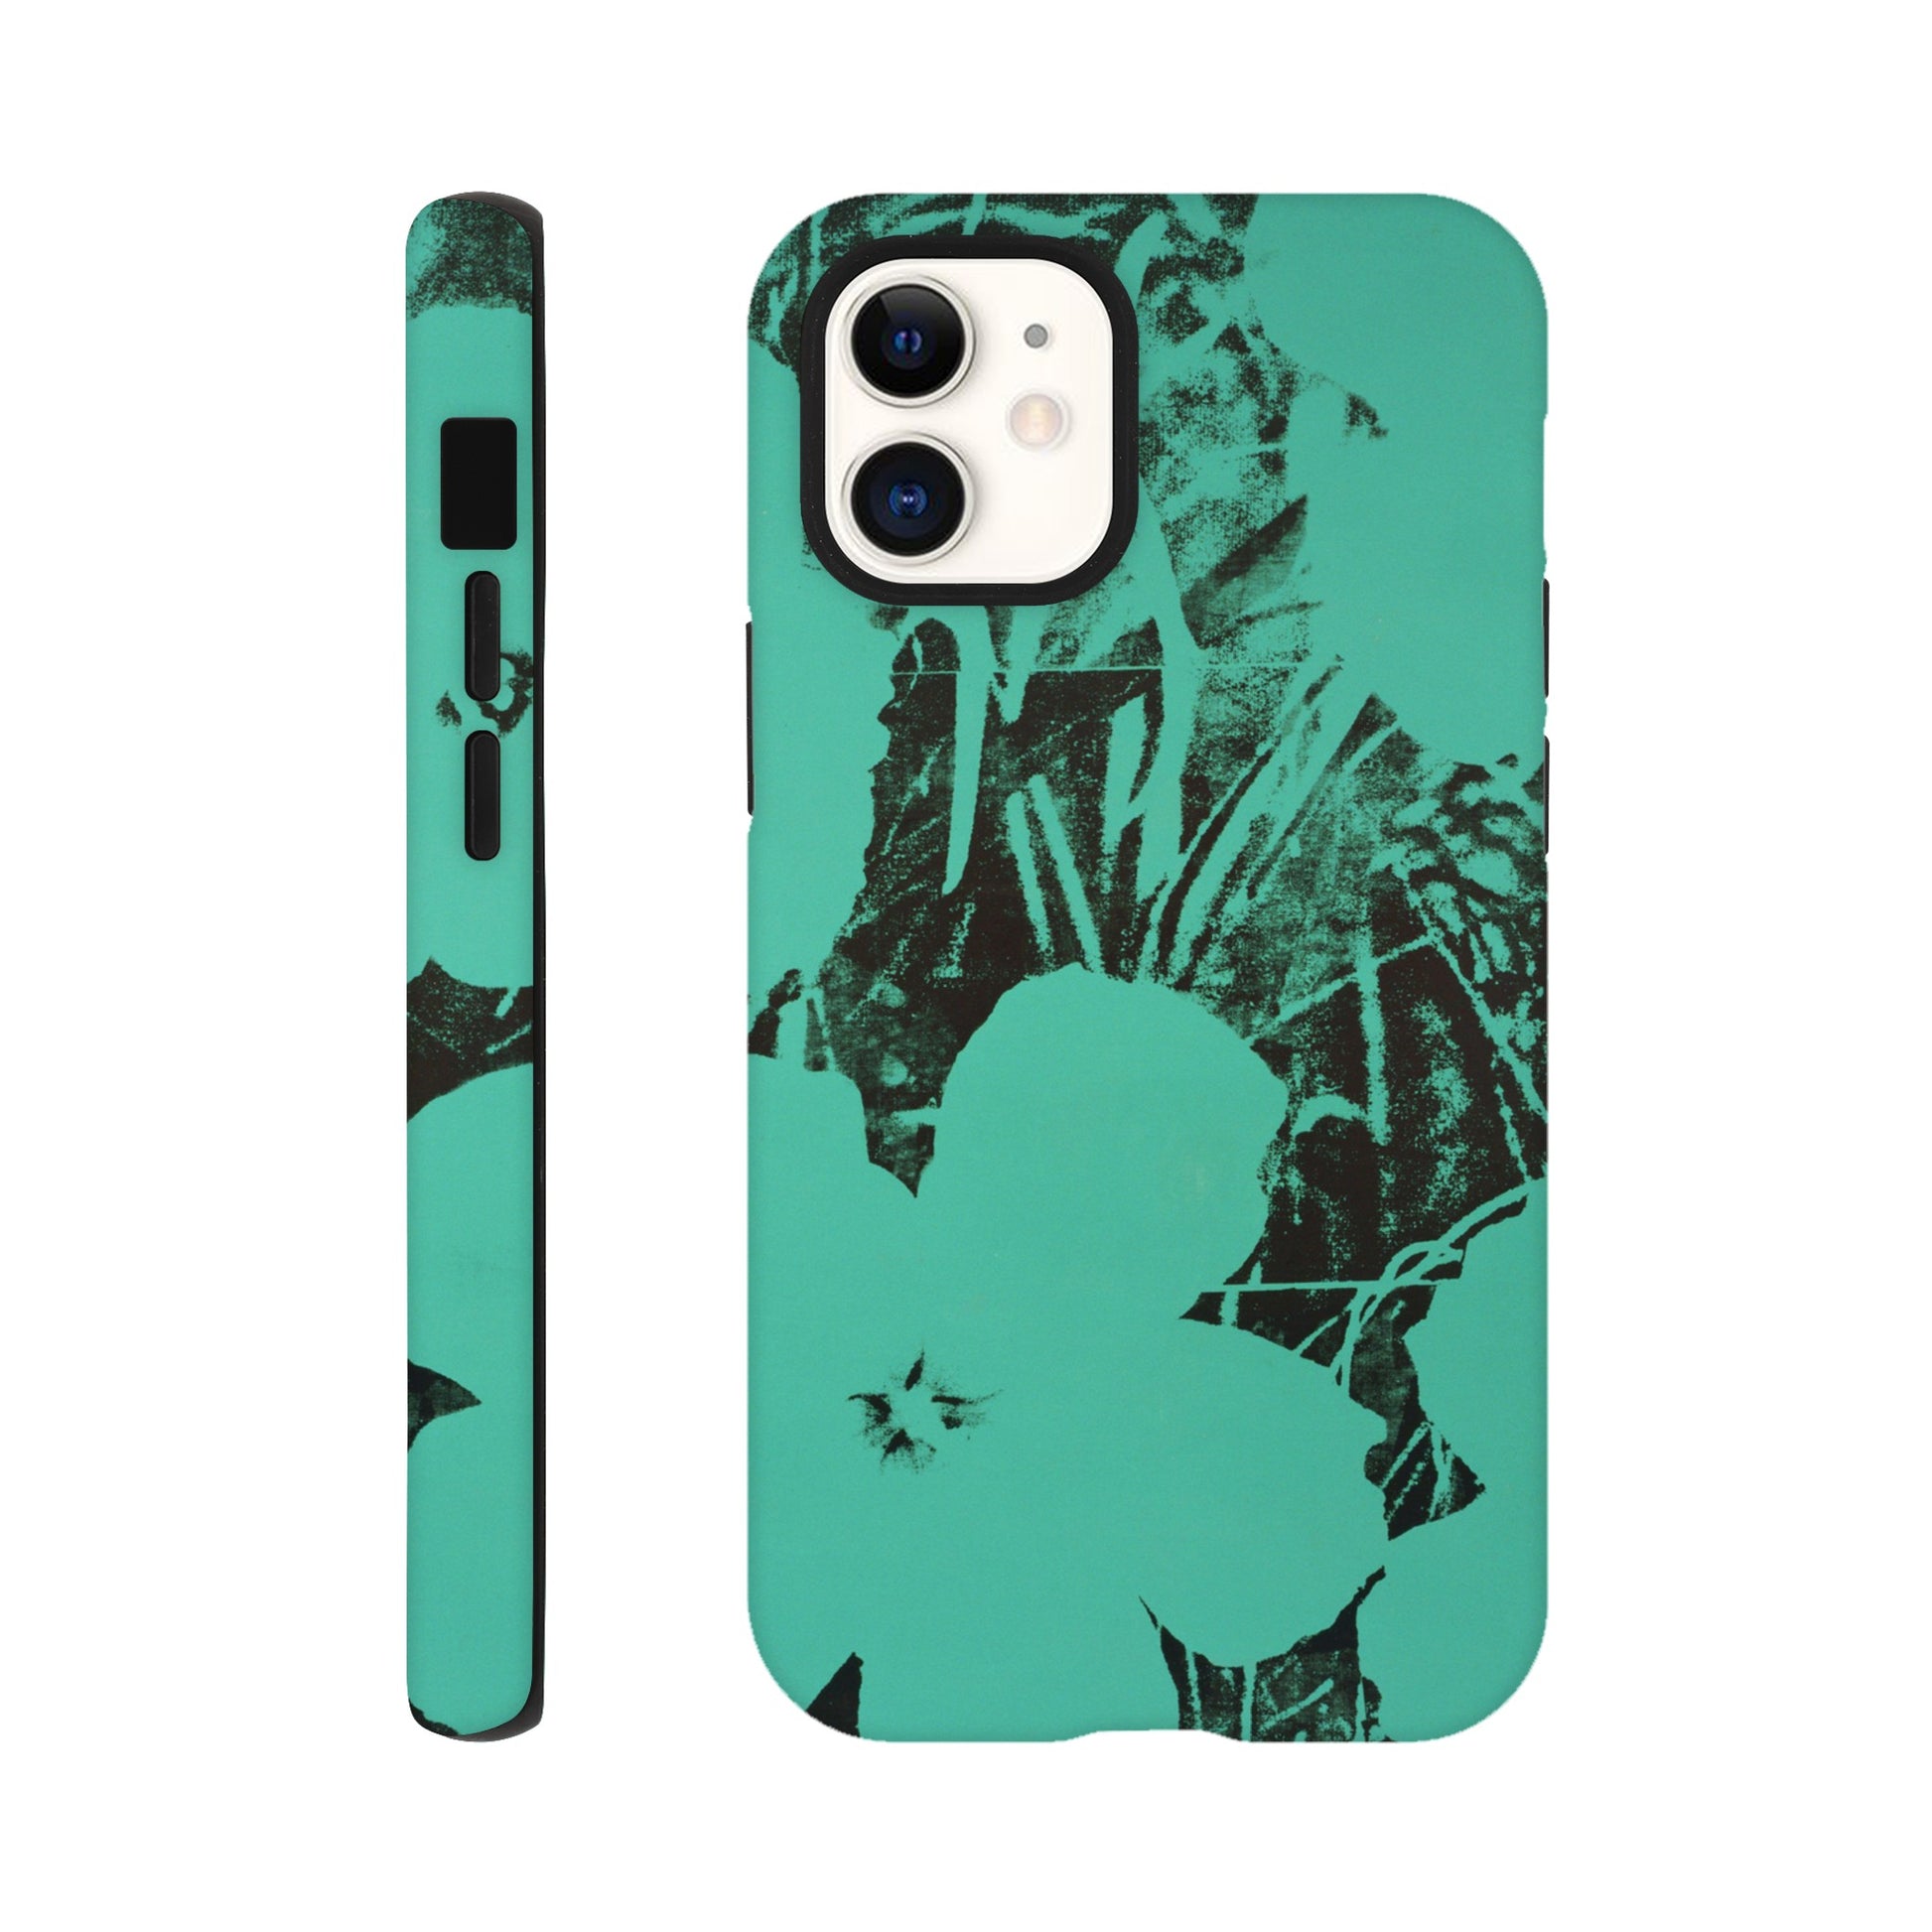 ANDY WARHOL - TEN-FOOT FLOWERS - TOUGH iPHONE PHONE CASE